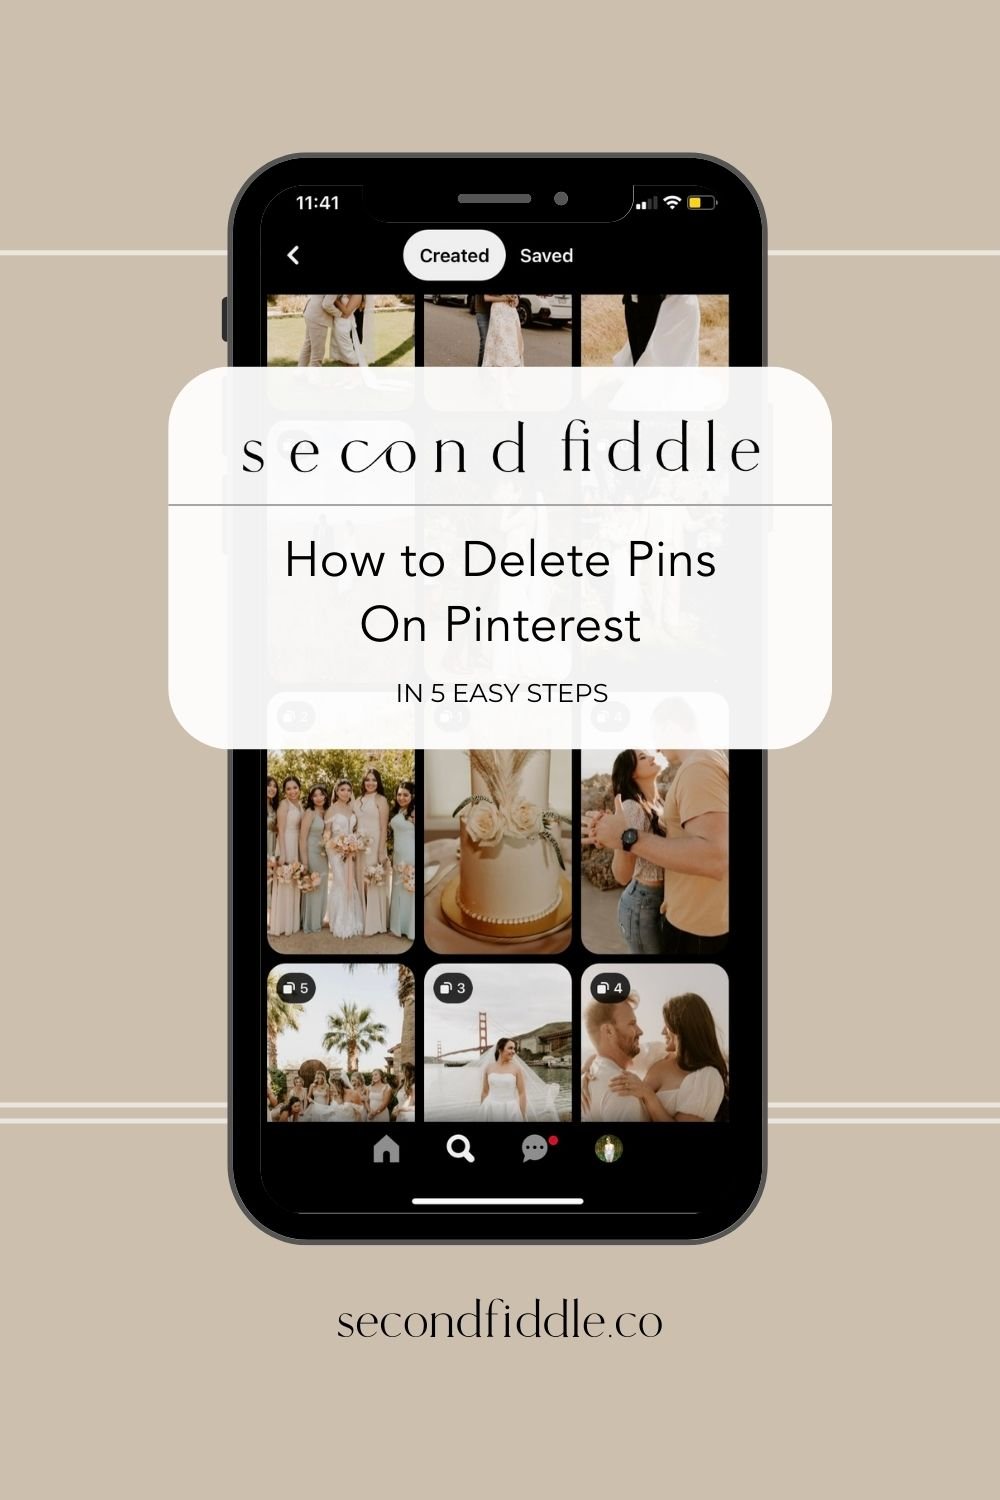 How to Delete Pins on Pinterest (5 Easy Steps) | Second Fiddle